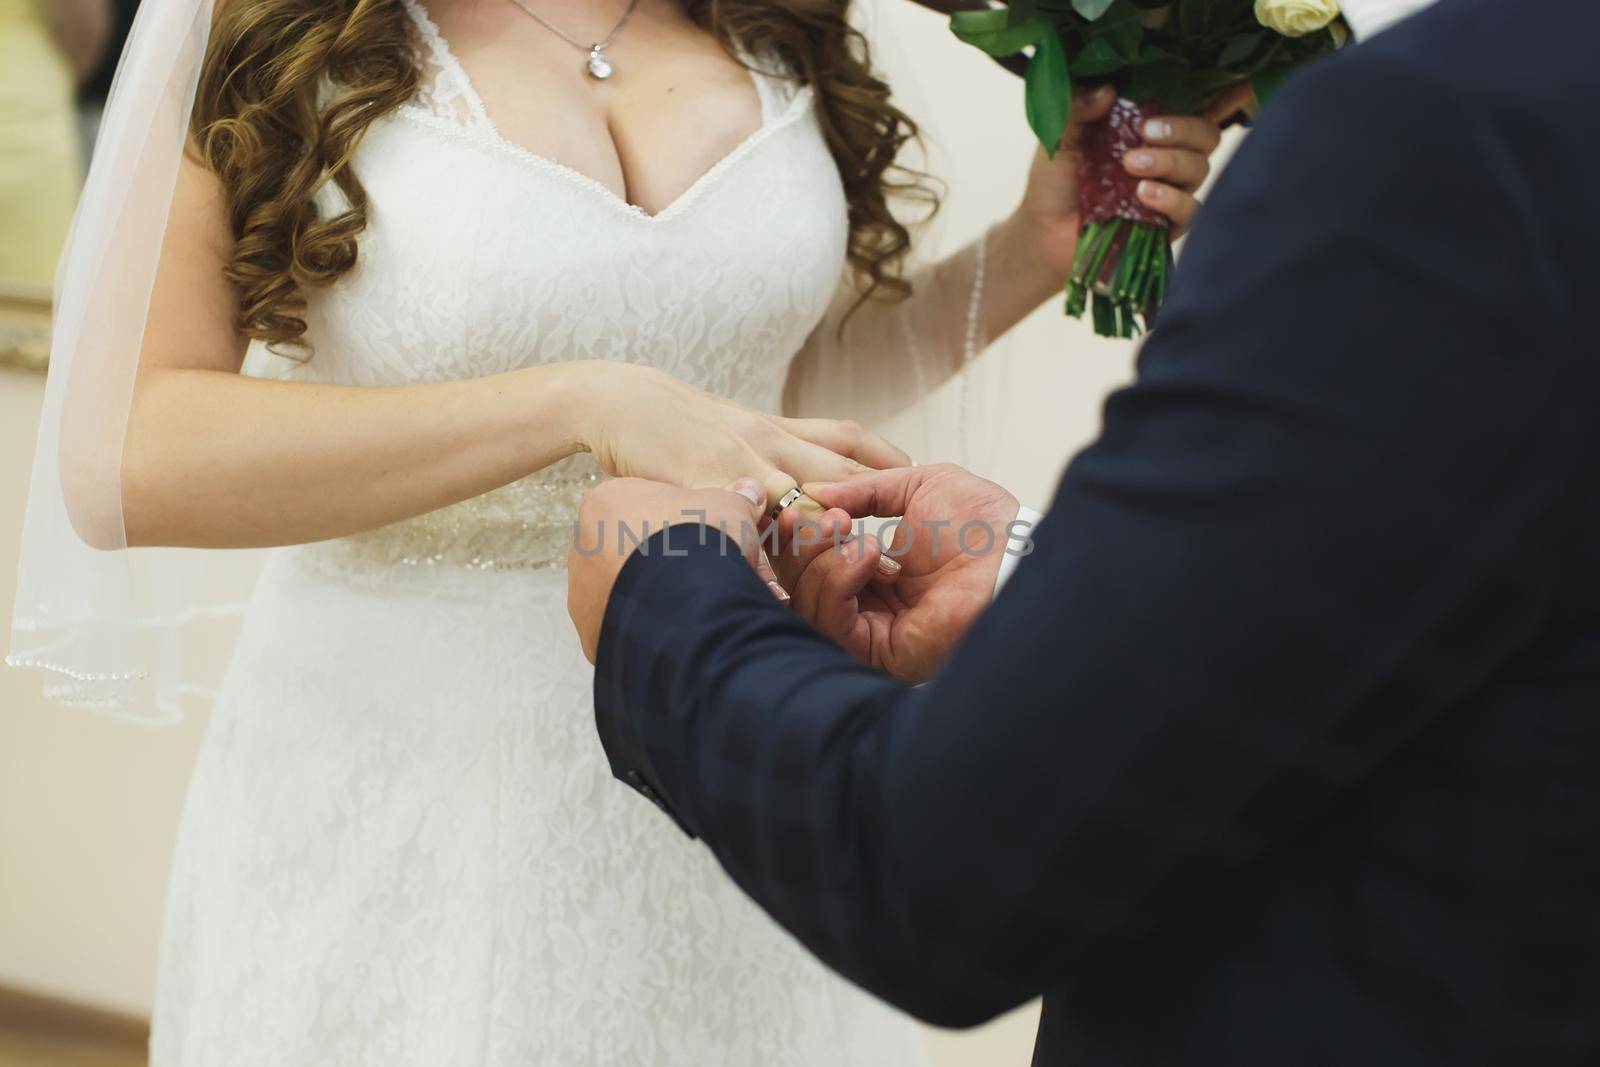 Newlyweds exchange rings, groom puts the ring on the bride's hand in marriage registry office. by StudioPeace